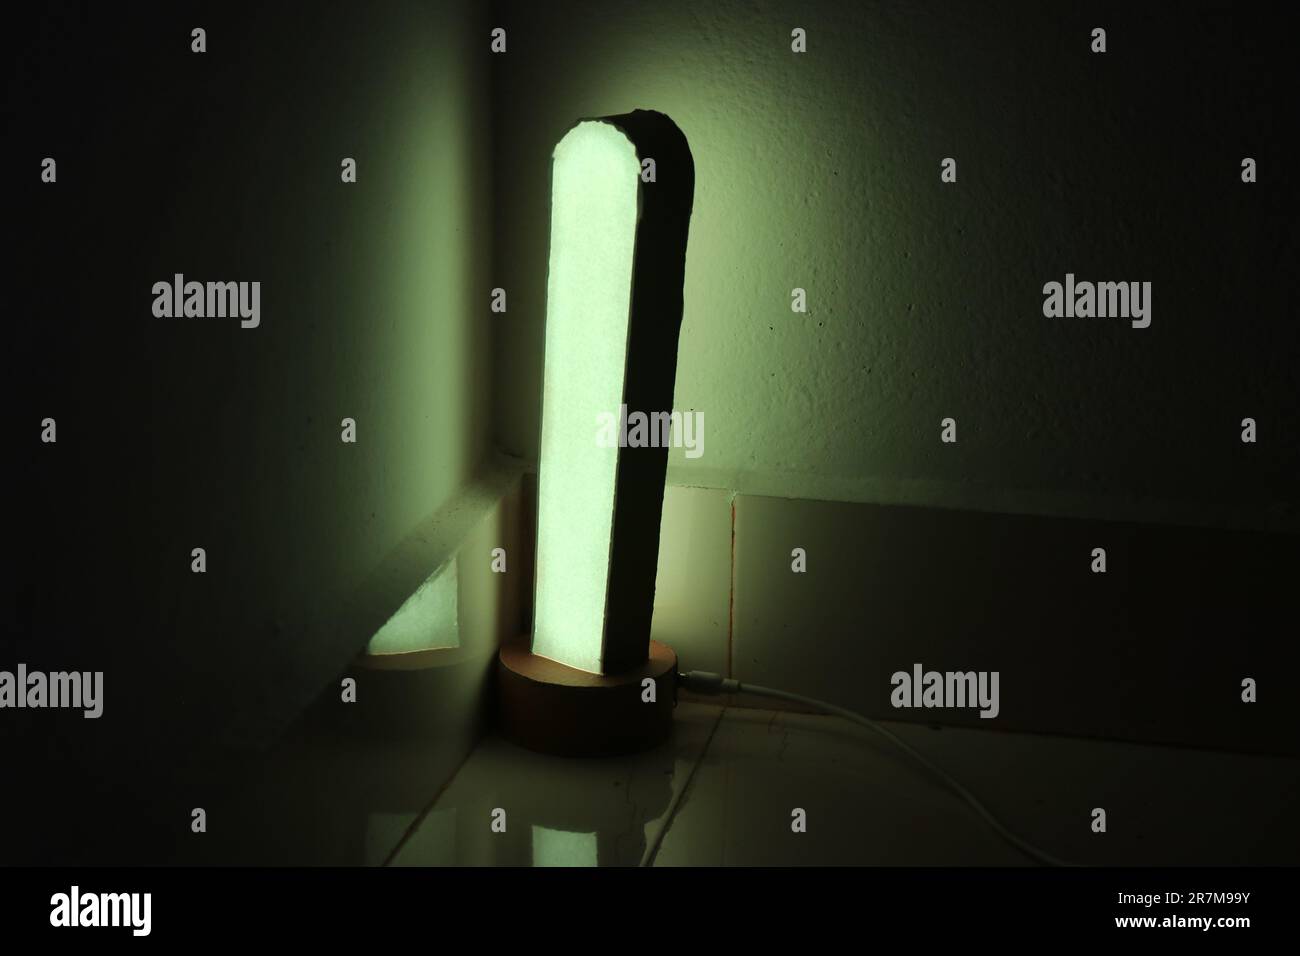 Modern desk lamp with green color light reflections on a wall Stock Photo